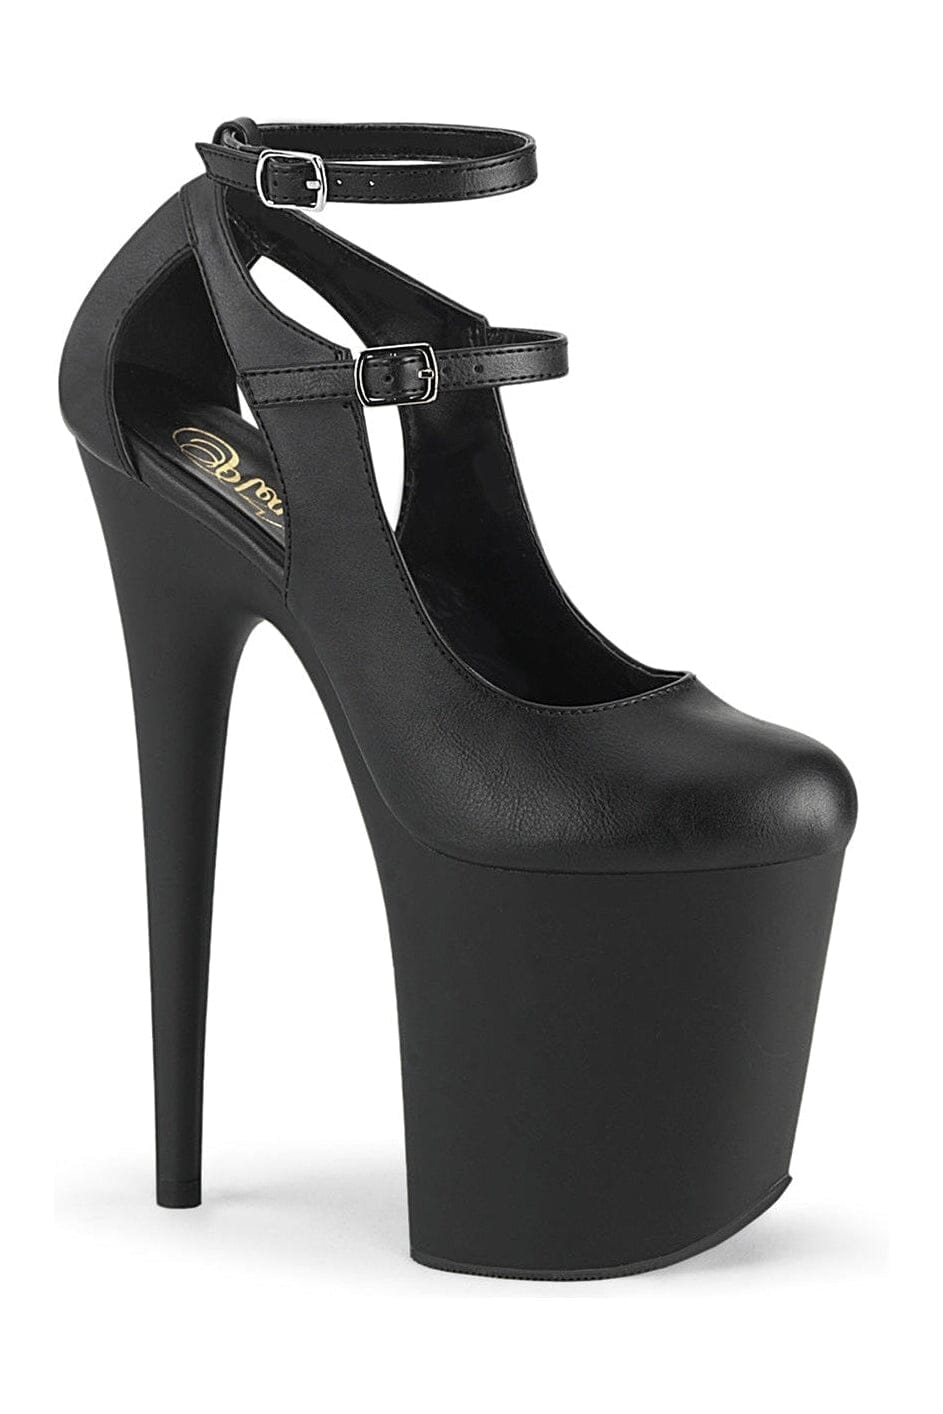 FLAMINGO-850 Black Faux Leather Mary Jane-Mary Jane-Pleaser-Black-10-Faux Leather-SEXYSHOES.COM